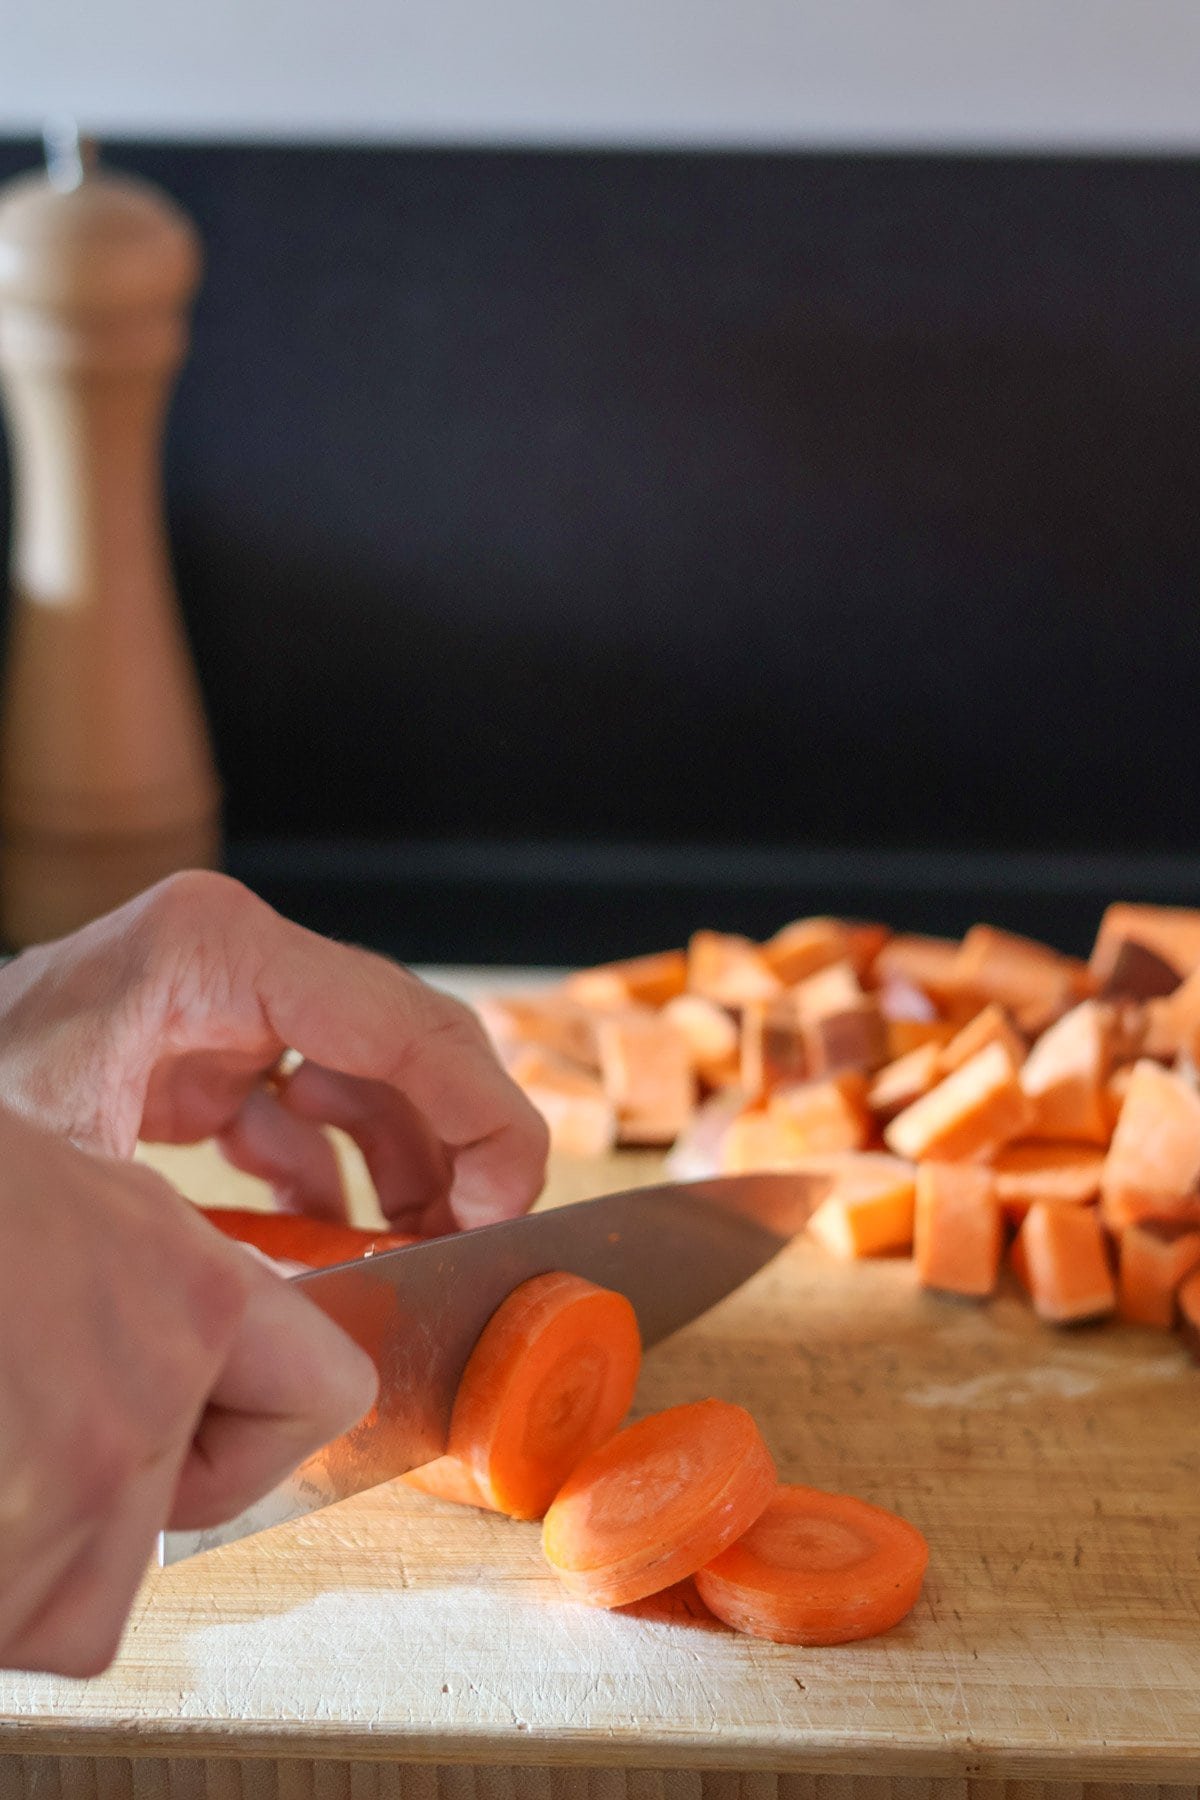 A carrot is cut into slices with a silver knife on a wooden cutting board.